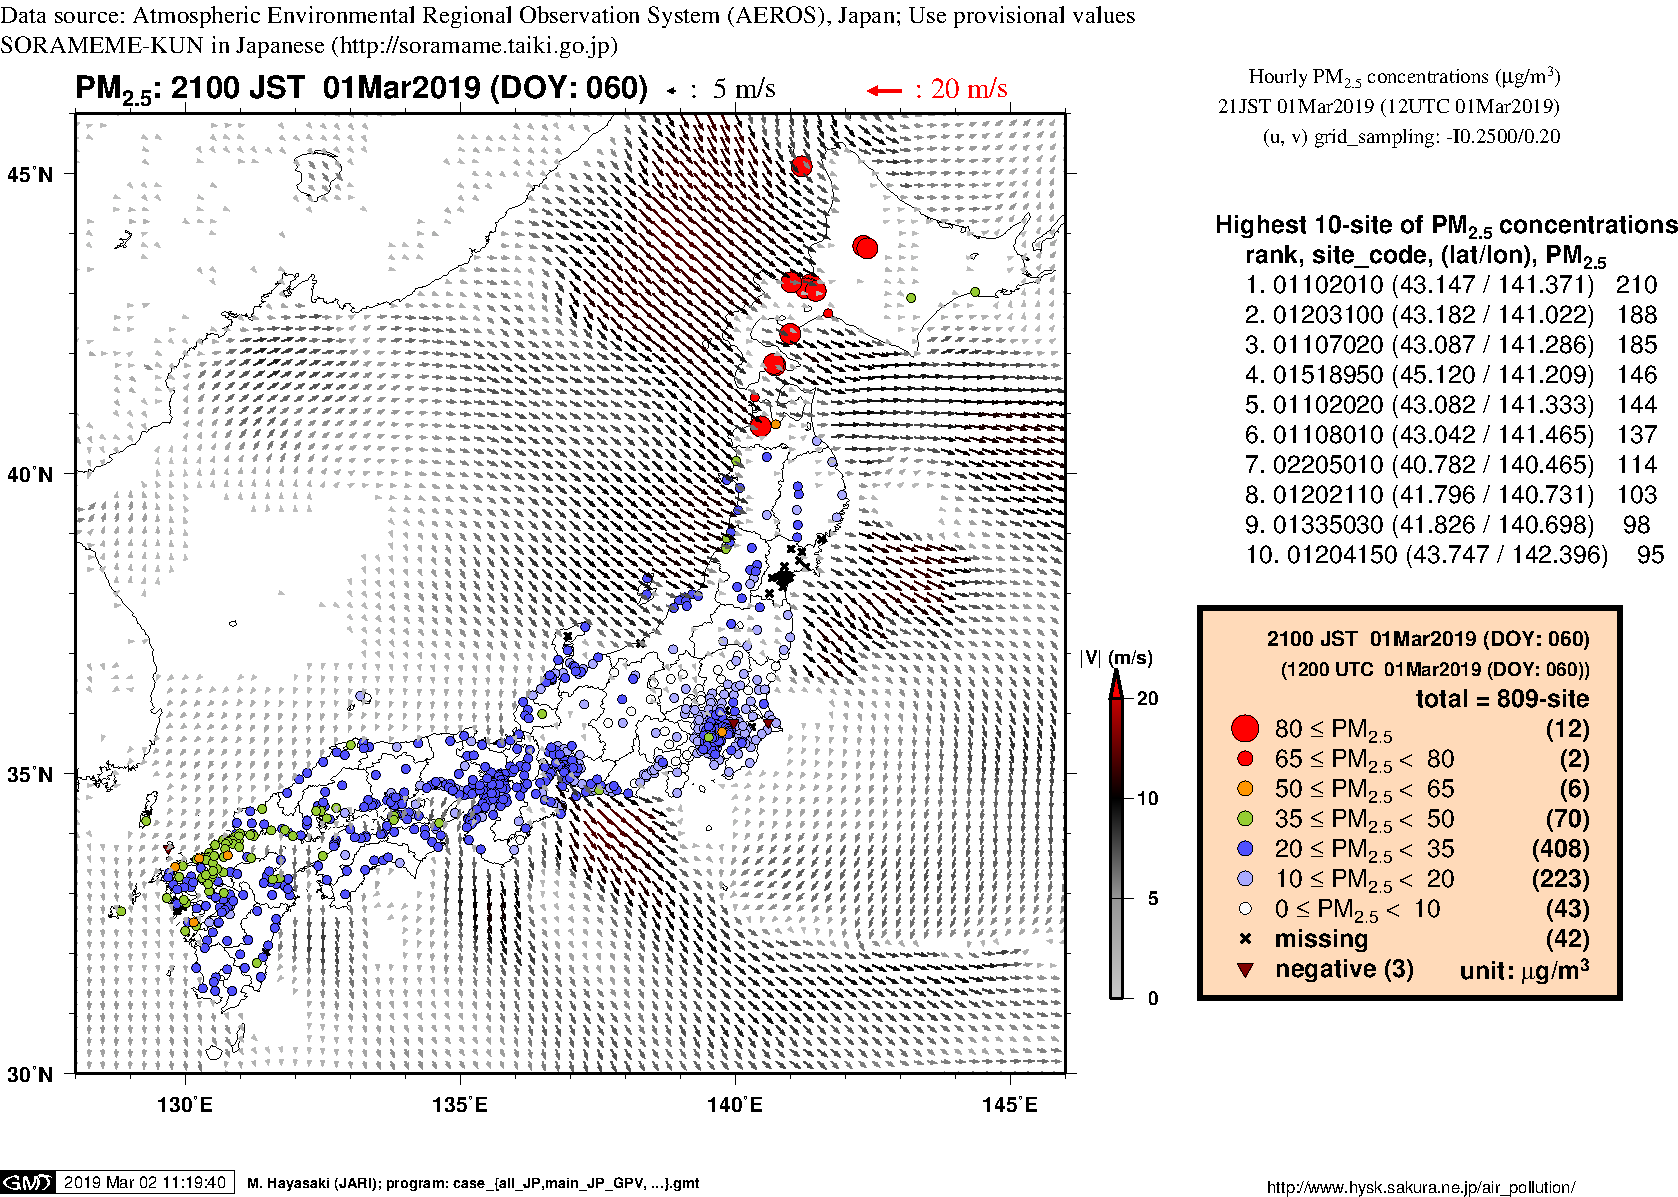 PM2.5 concentration in mainland Japan (21JST 01Mar2019)